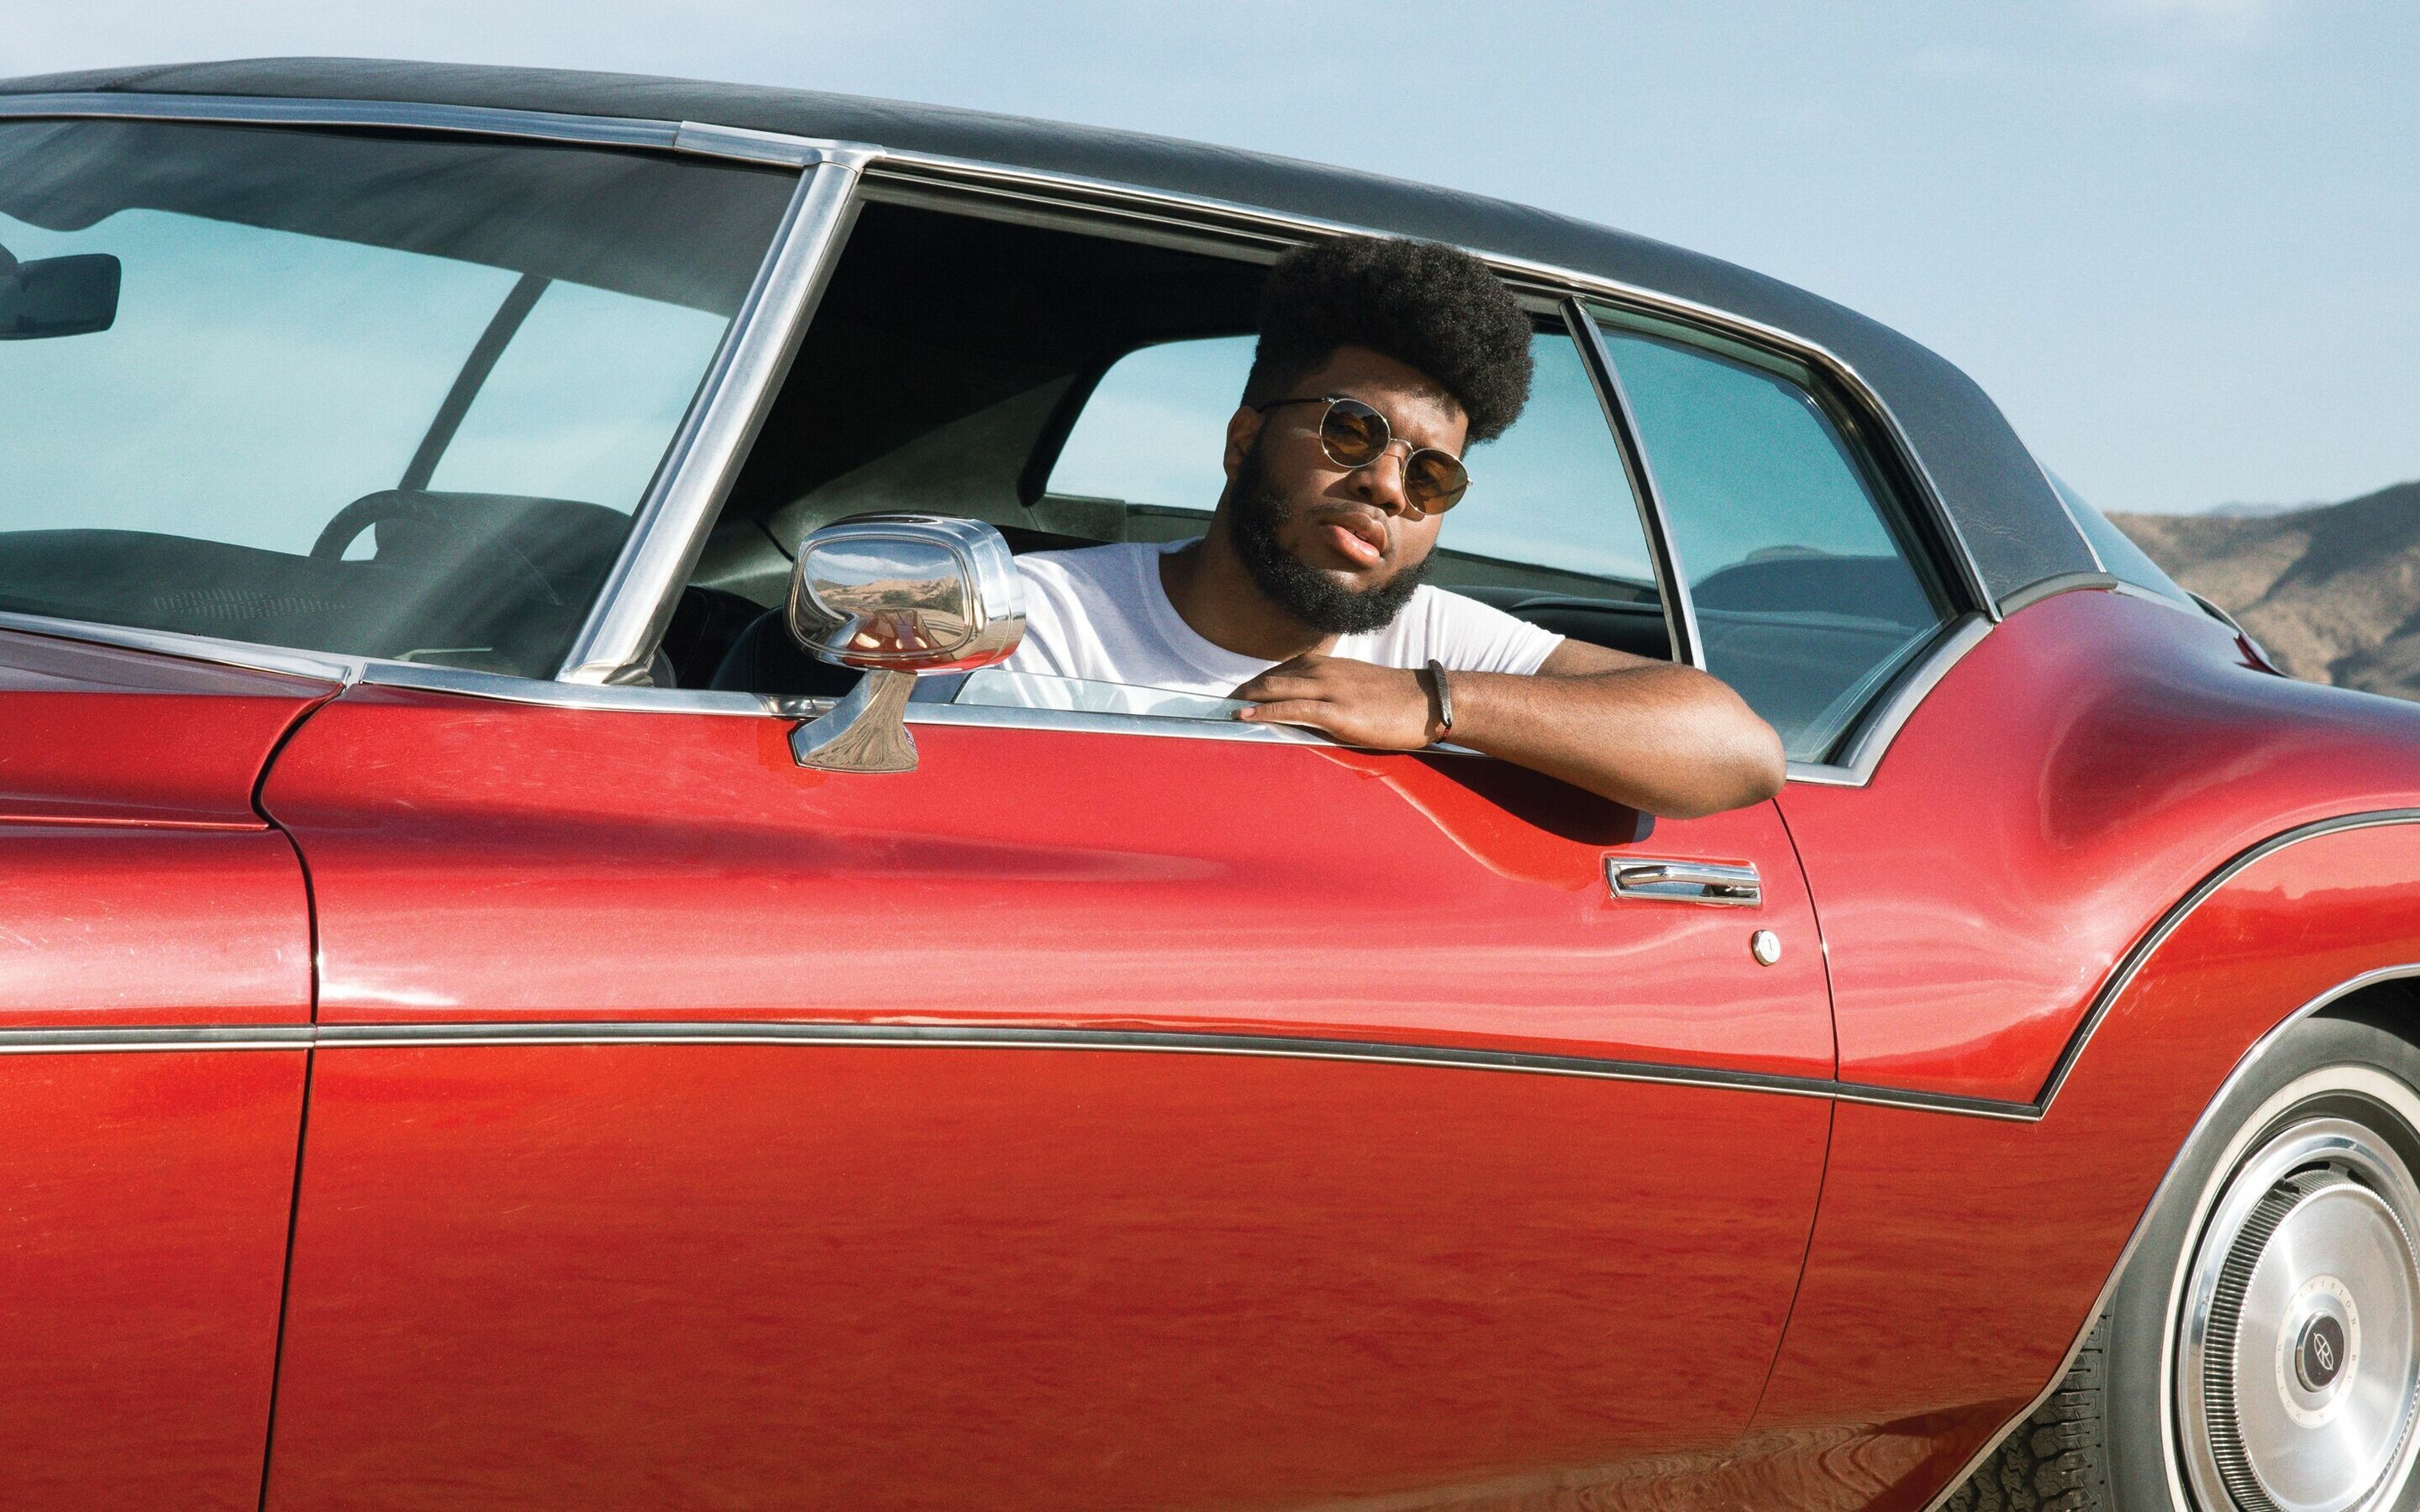 Khalid (Singer): Music artist, US top 20 singles "Location" and "Young Dumb and Broke". 2880x1800 HD Background.